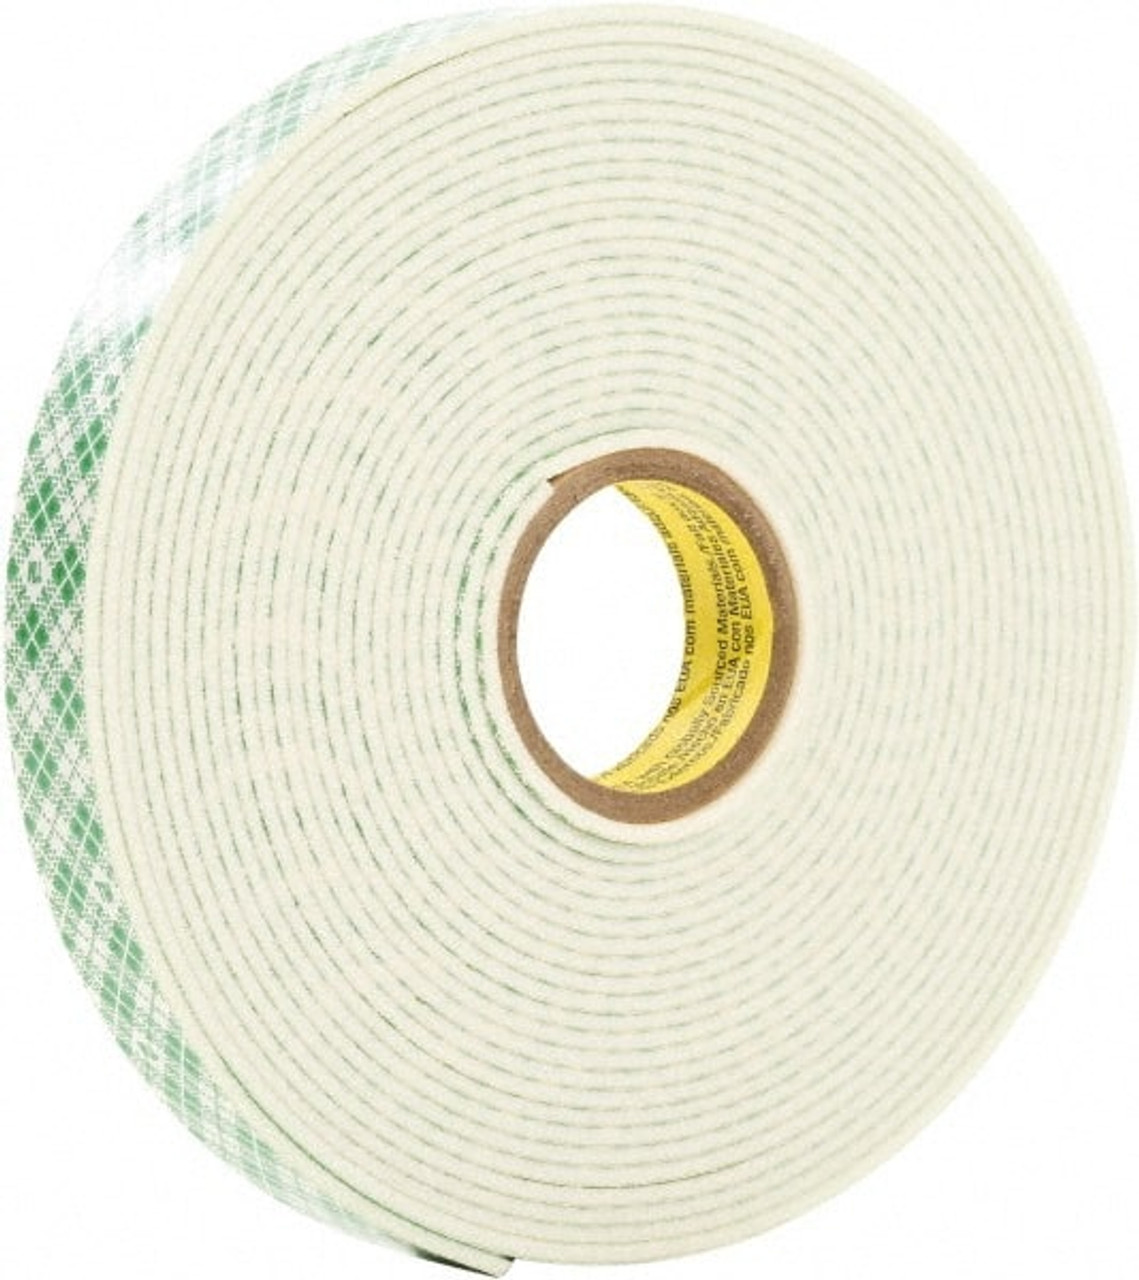 3M 1/2 x 5 Yd Acrylic Adhesive Double Sided Tape 0.04 Thick, Urethane  Foam Liner, Series 4026W 7010313222 - 36478972 - Penn Tool Co., Inc